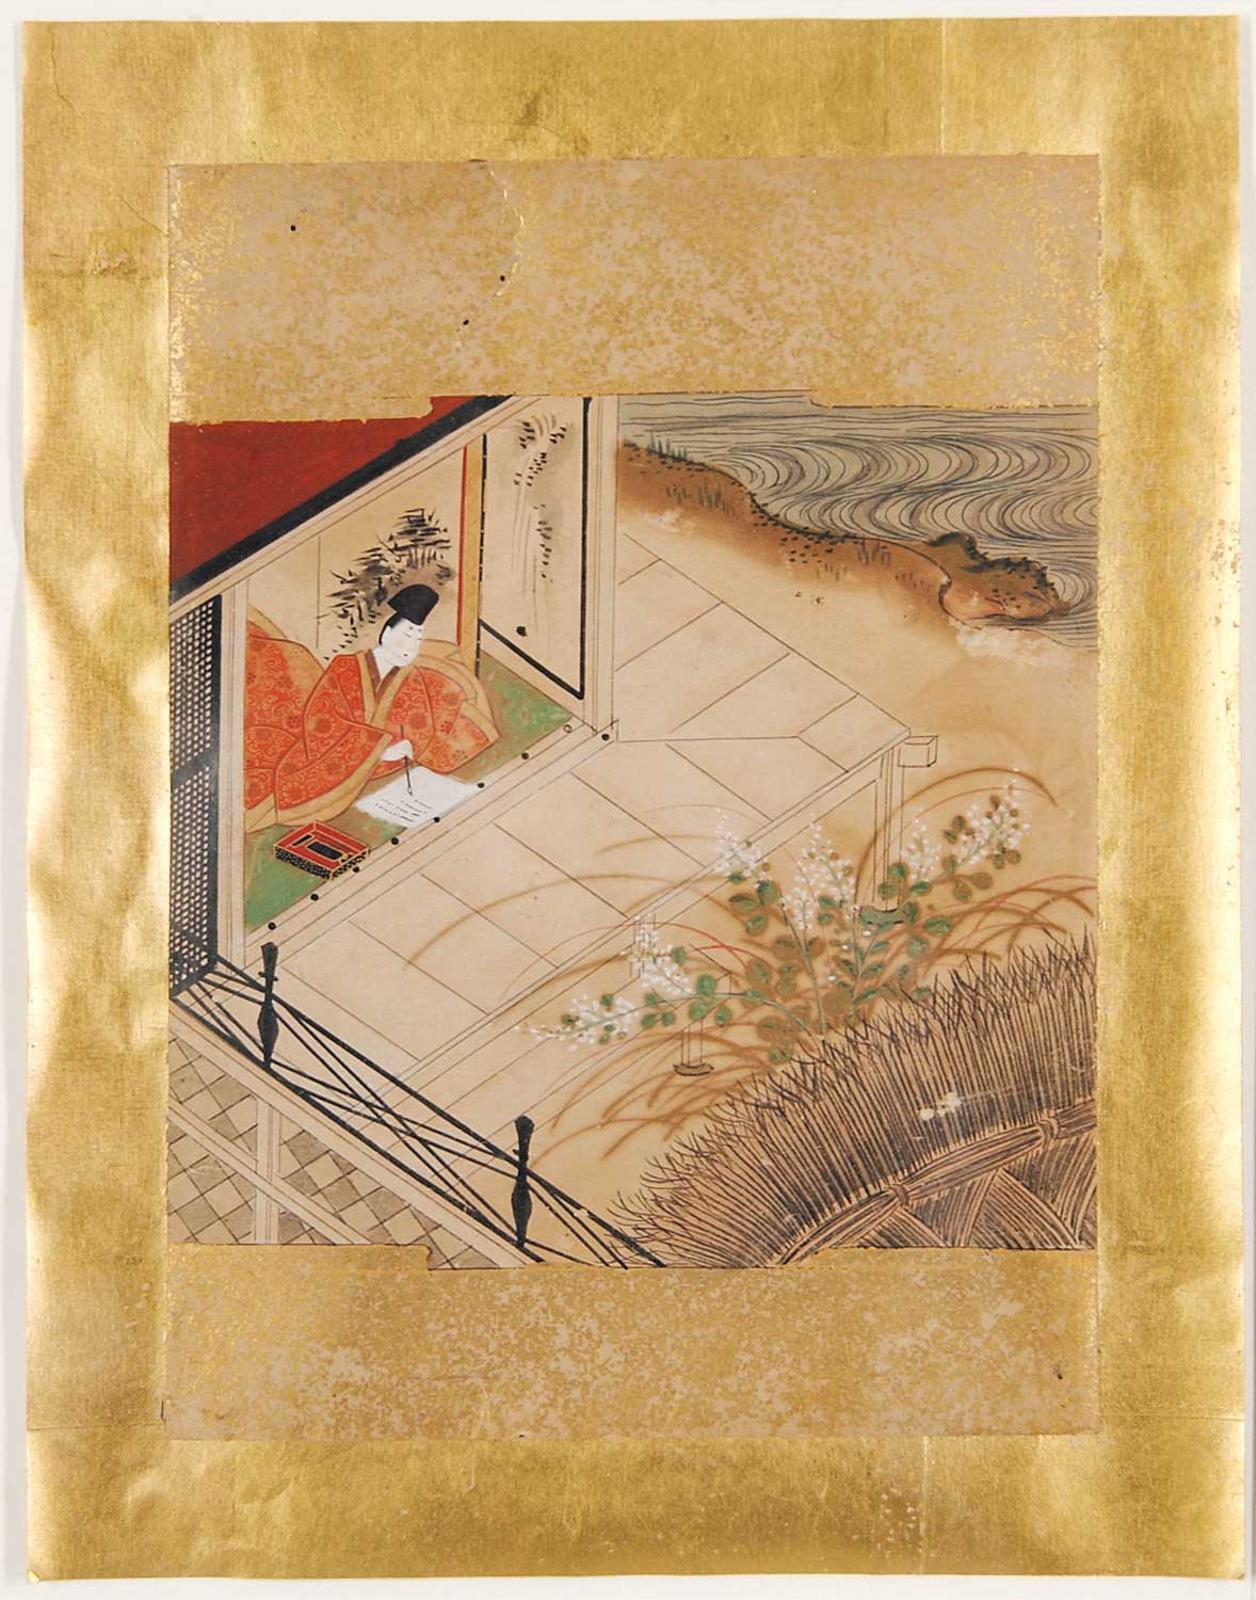 Japanese School - Untitled - Scene from the Tale of the Genji